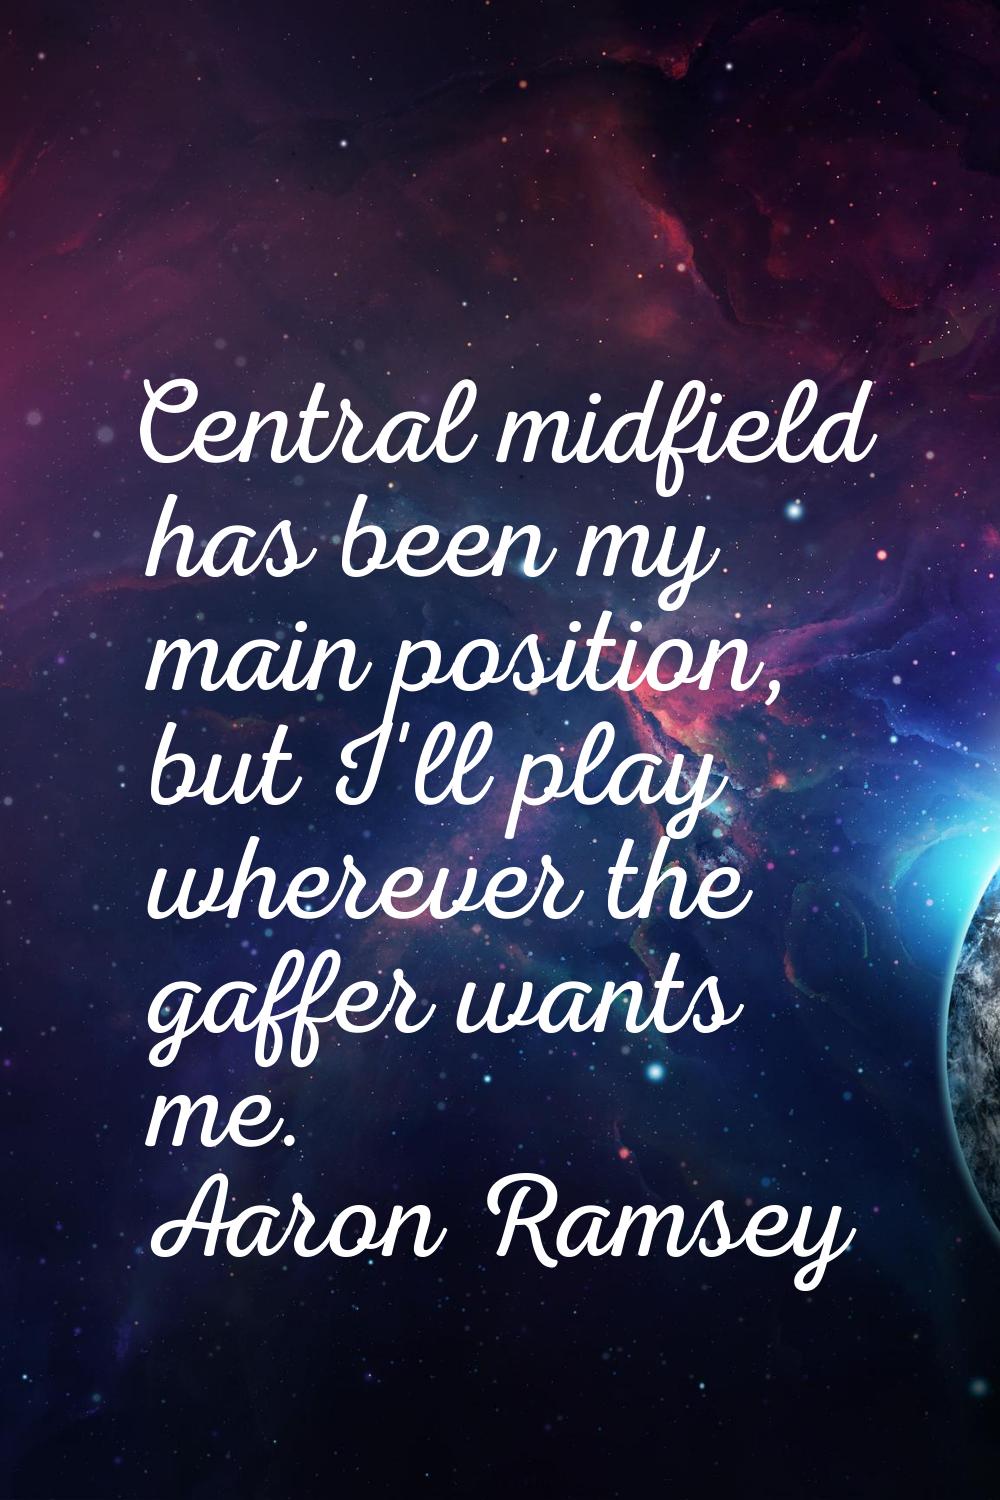 Central midfield has been my main position, but I'll play wherever the gaffer wants me.